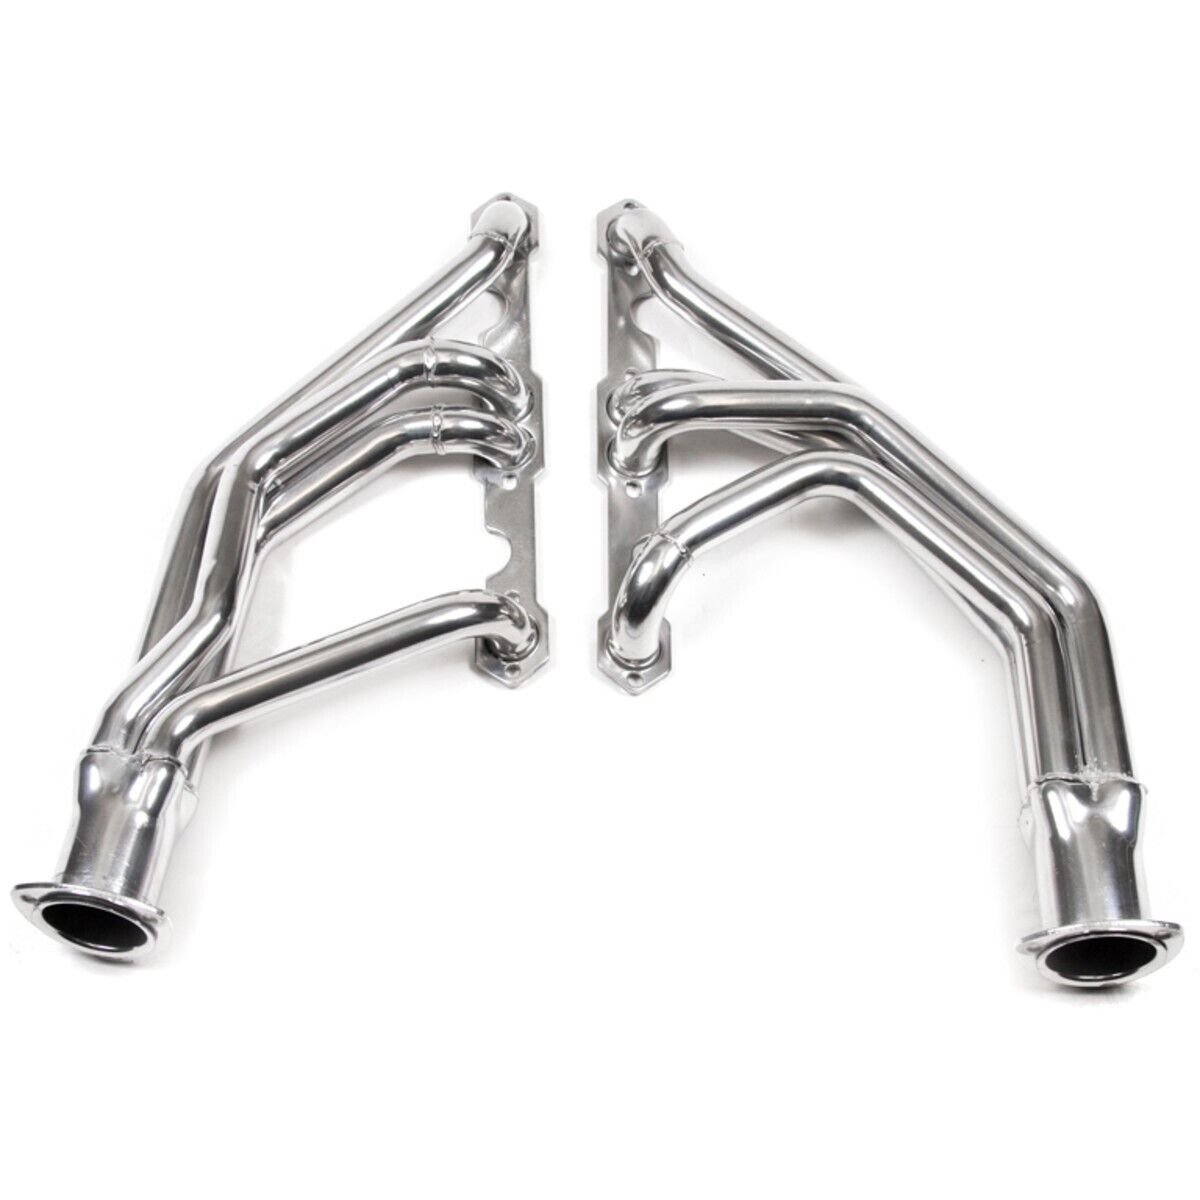 31110FLT Flowtech Set of 2 Headers for Chevy Chevrolet II 1964-1967 Pair